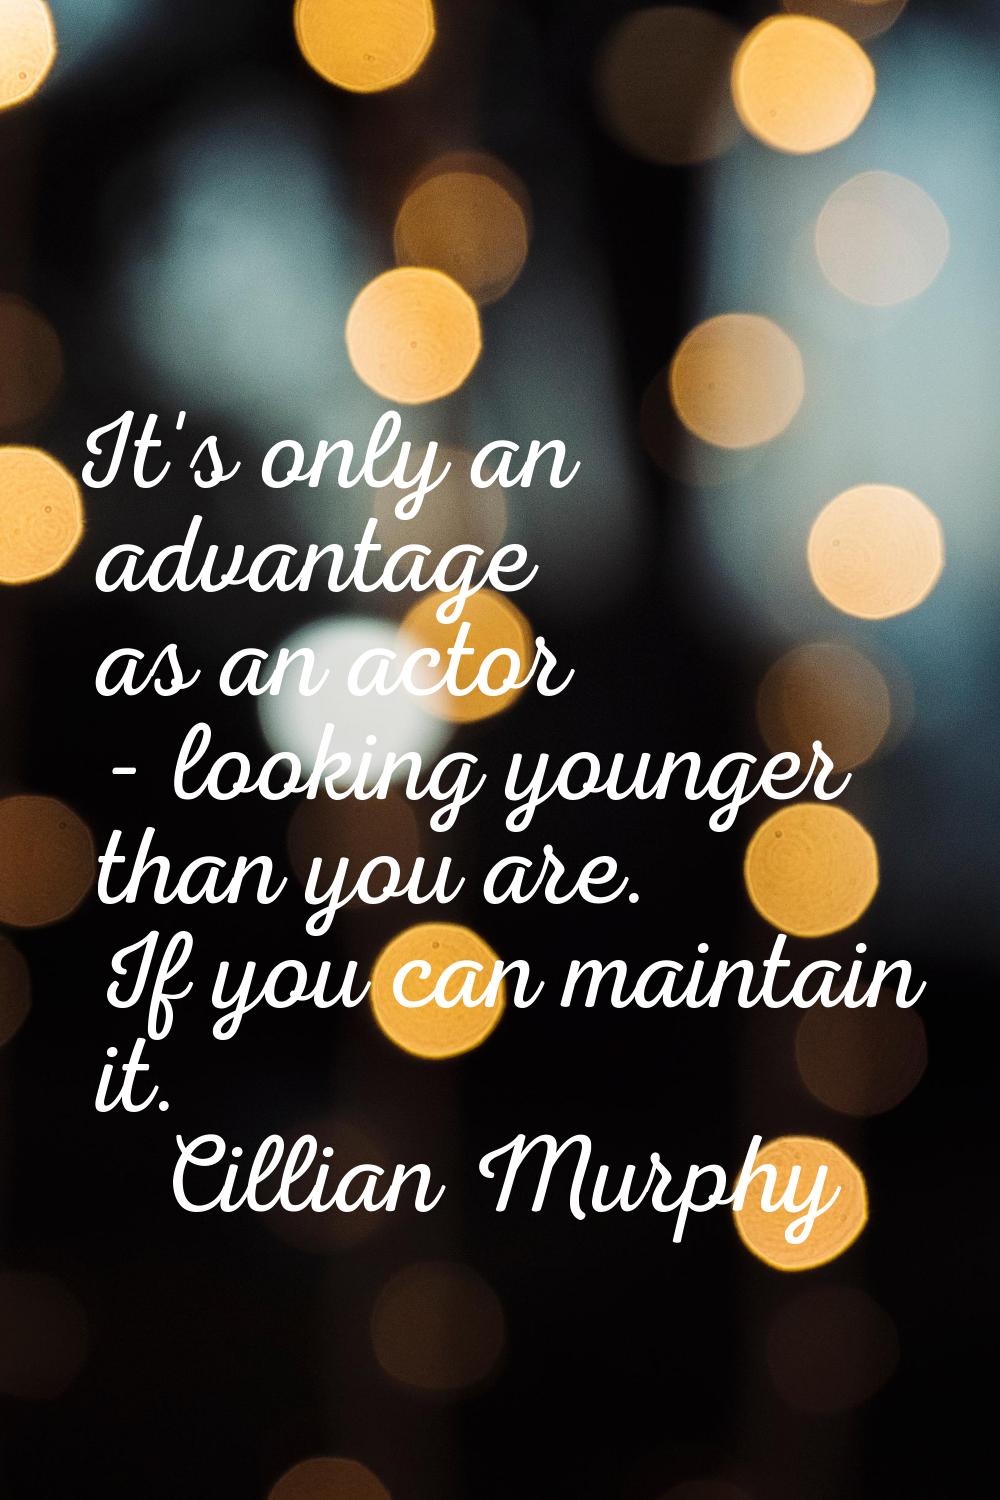 It's only an advantage as an actor - looking younger than you are. If you can maintain it.